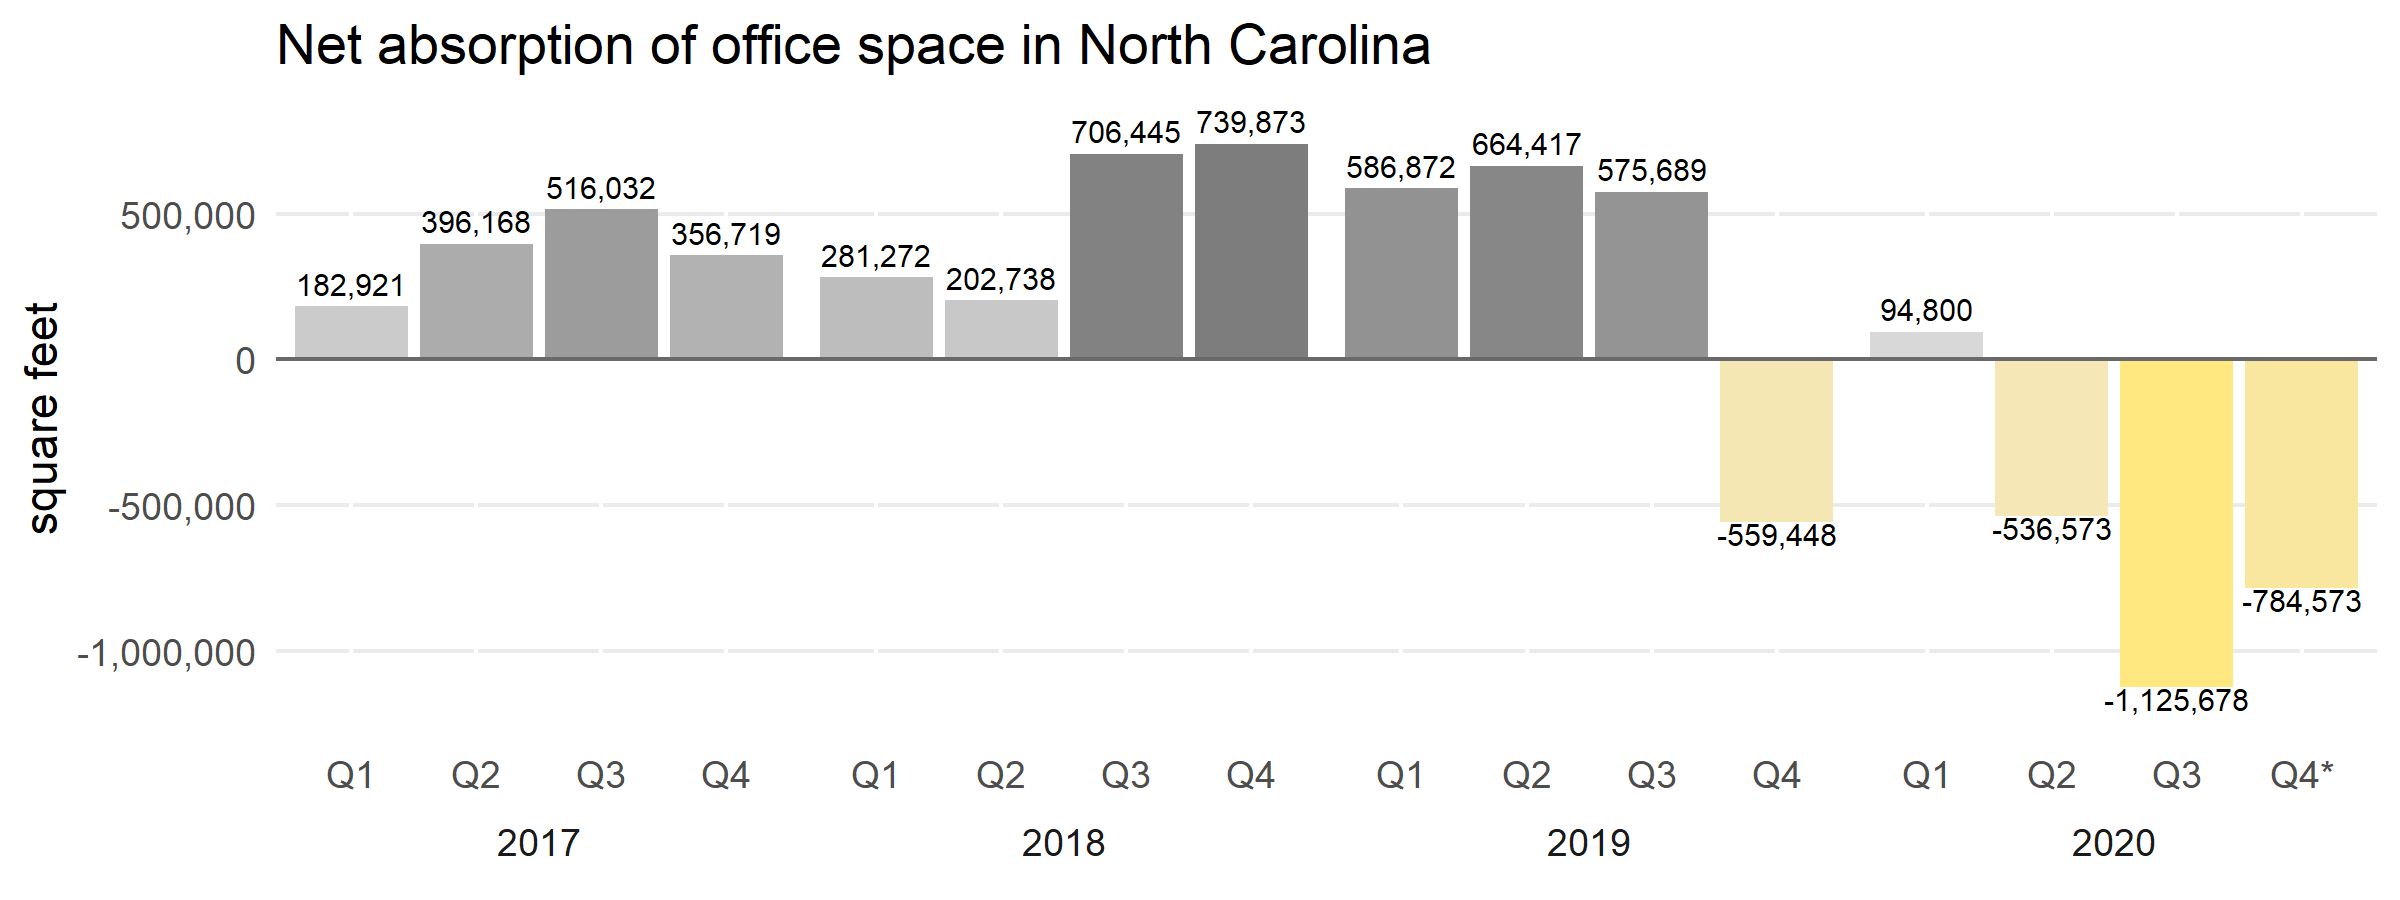 Net absorption of office space in North Carolina. A horizontal bar chart displaying positive quarterly net absorption values for 2017, 2018, and 2019. In the fourth quarter of 2019 and the second, third, and fourth quarters of 2020, the net absorption for North Carolina is negative, represented in gray.